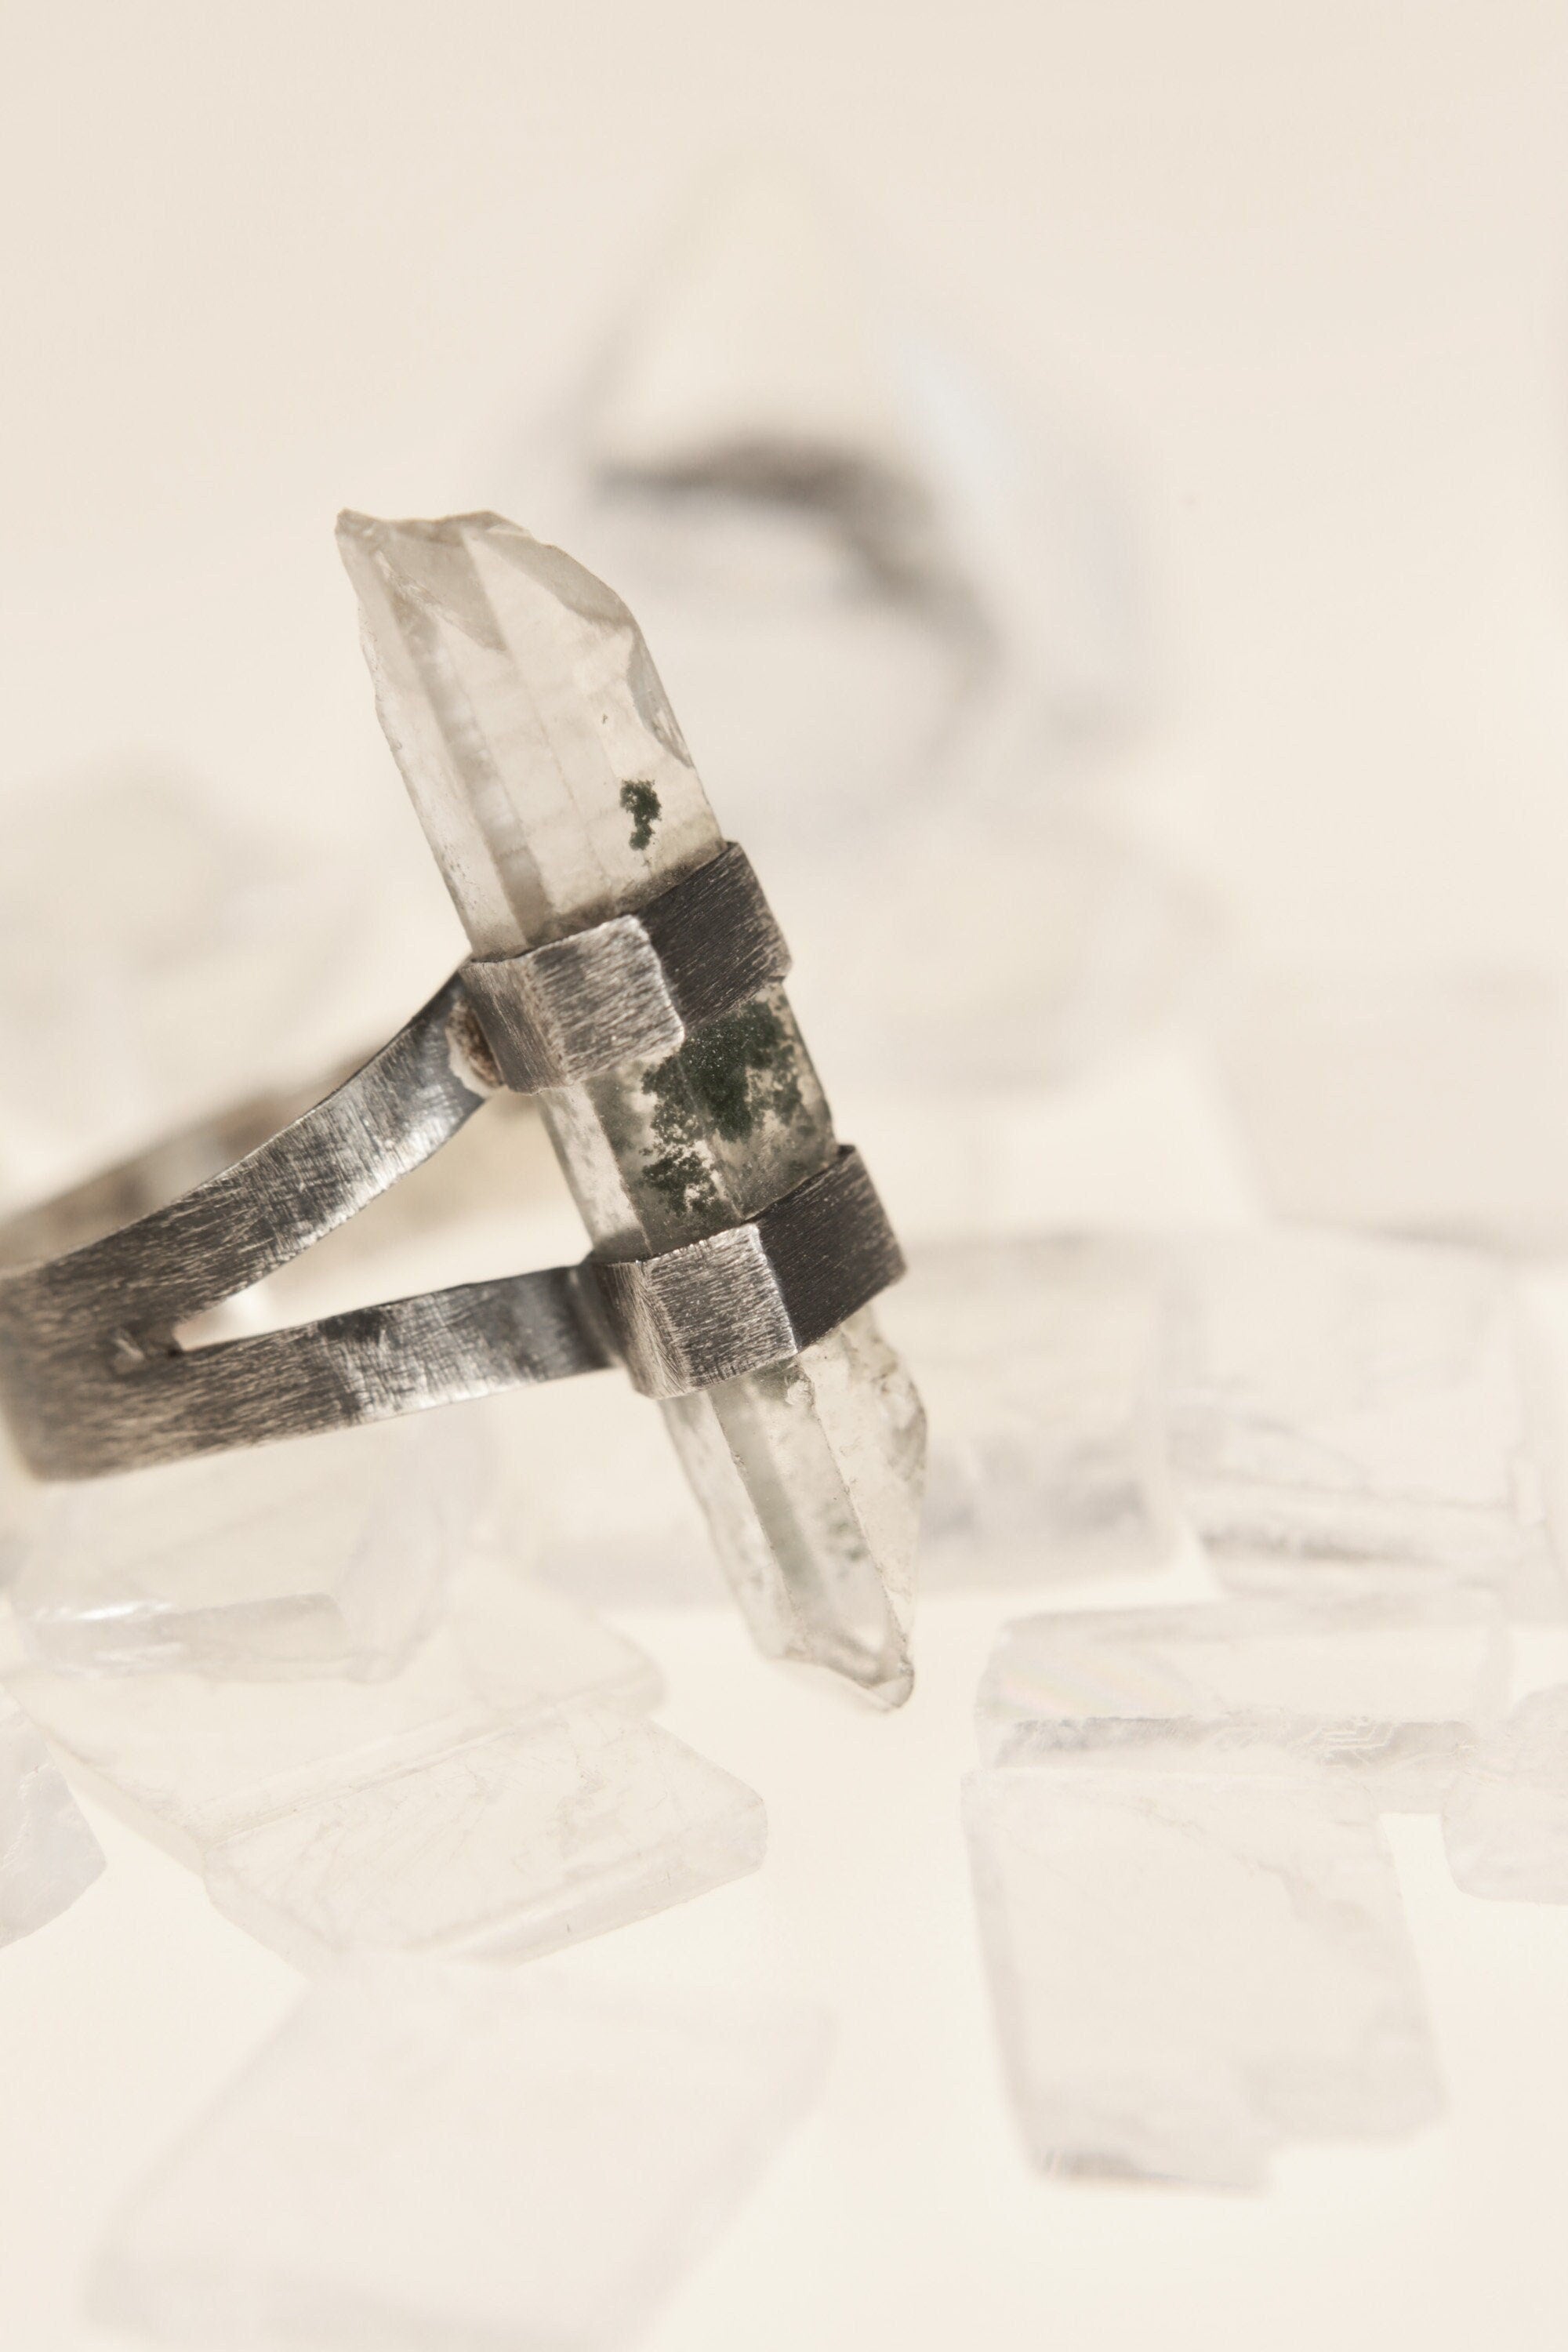 Himalayan Harmony: Textured & Oxidised Sterling Silver Ring with Himalayan Chlorite Inclusion Quartz - Size 6 3/4 US